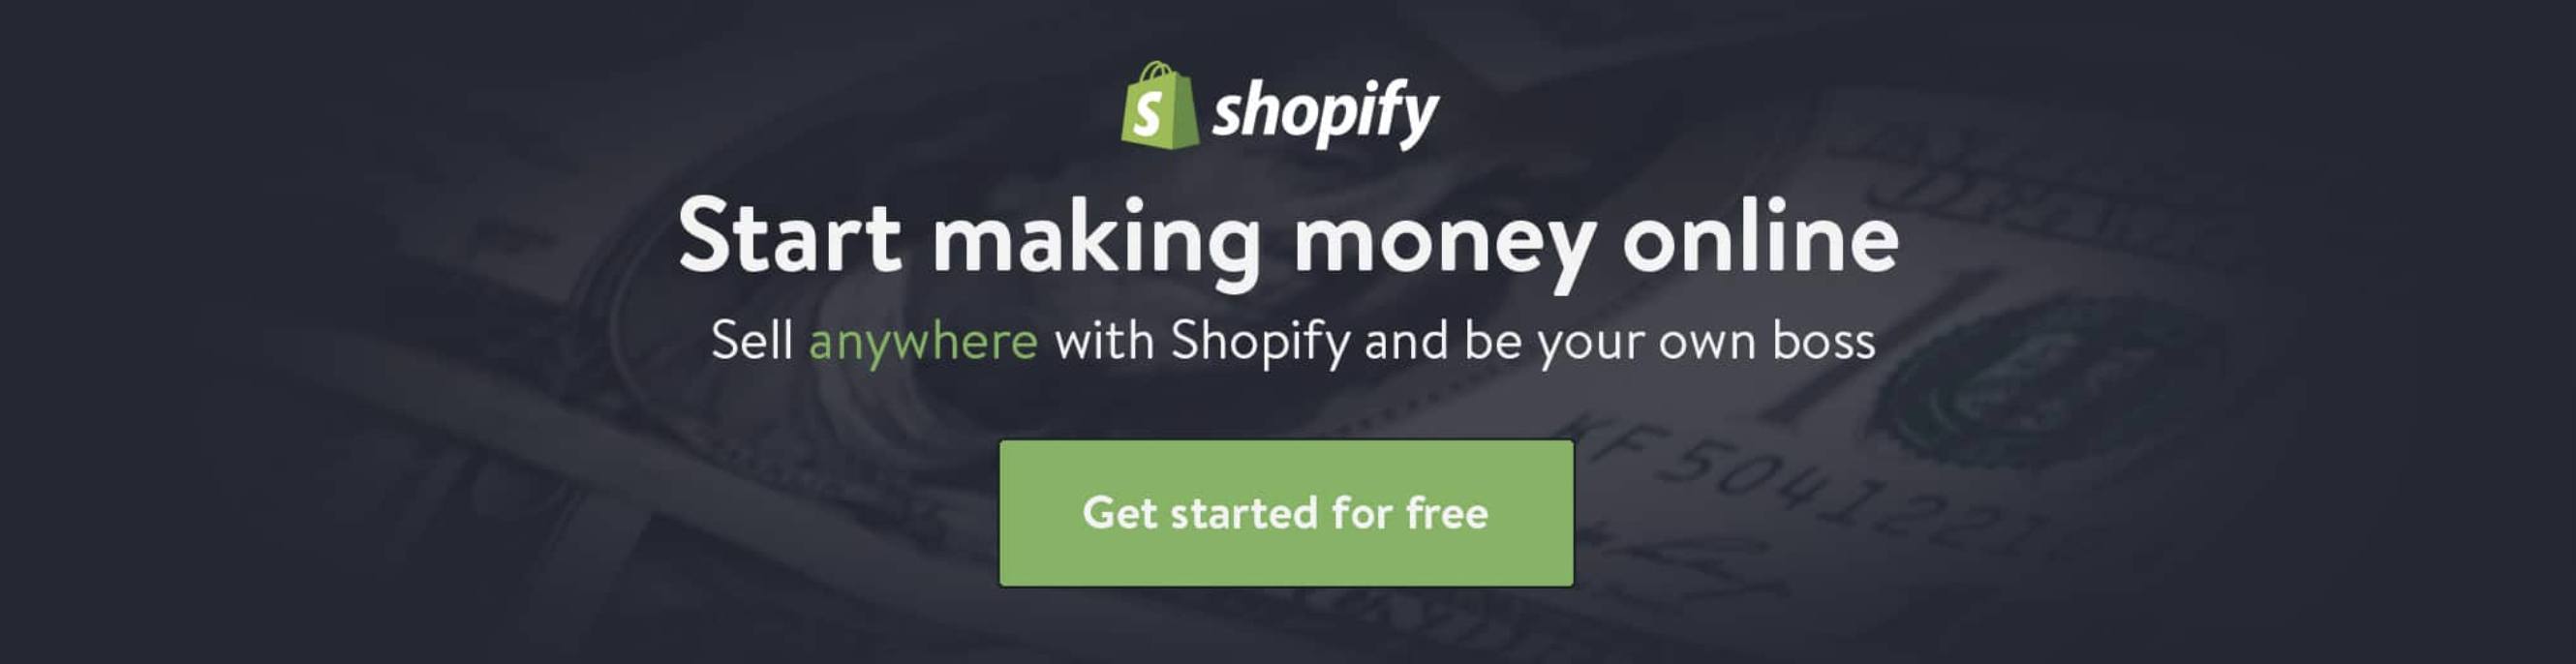 16 Dropshipping Tips for New Entrepreneurs You Need to Know